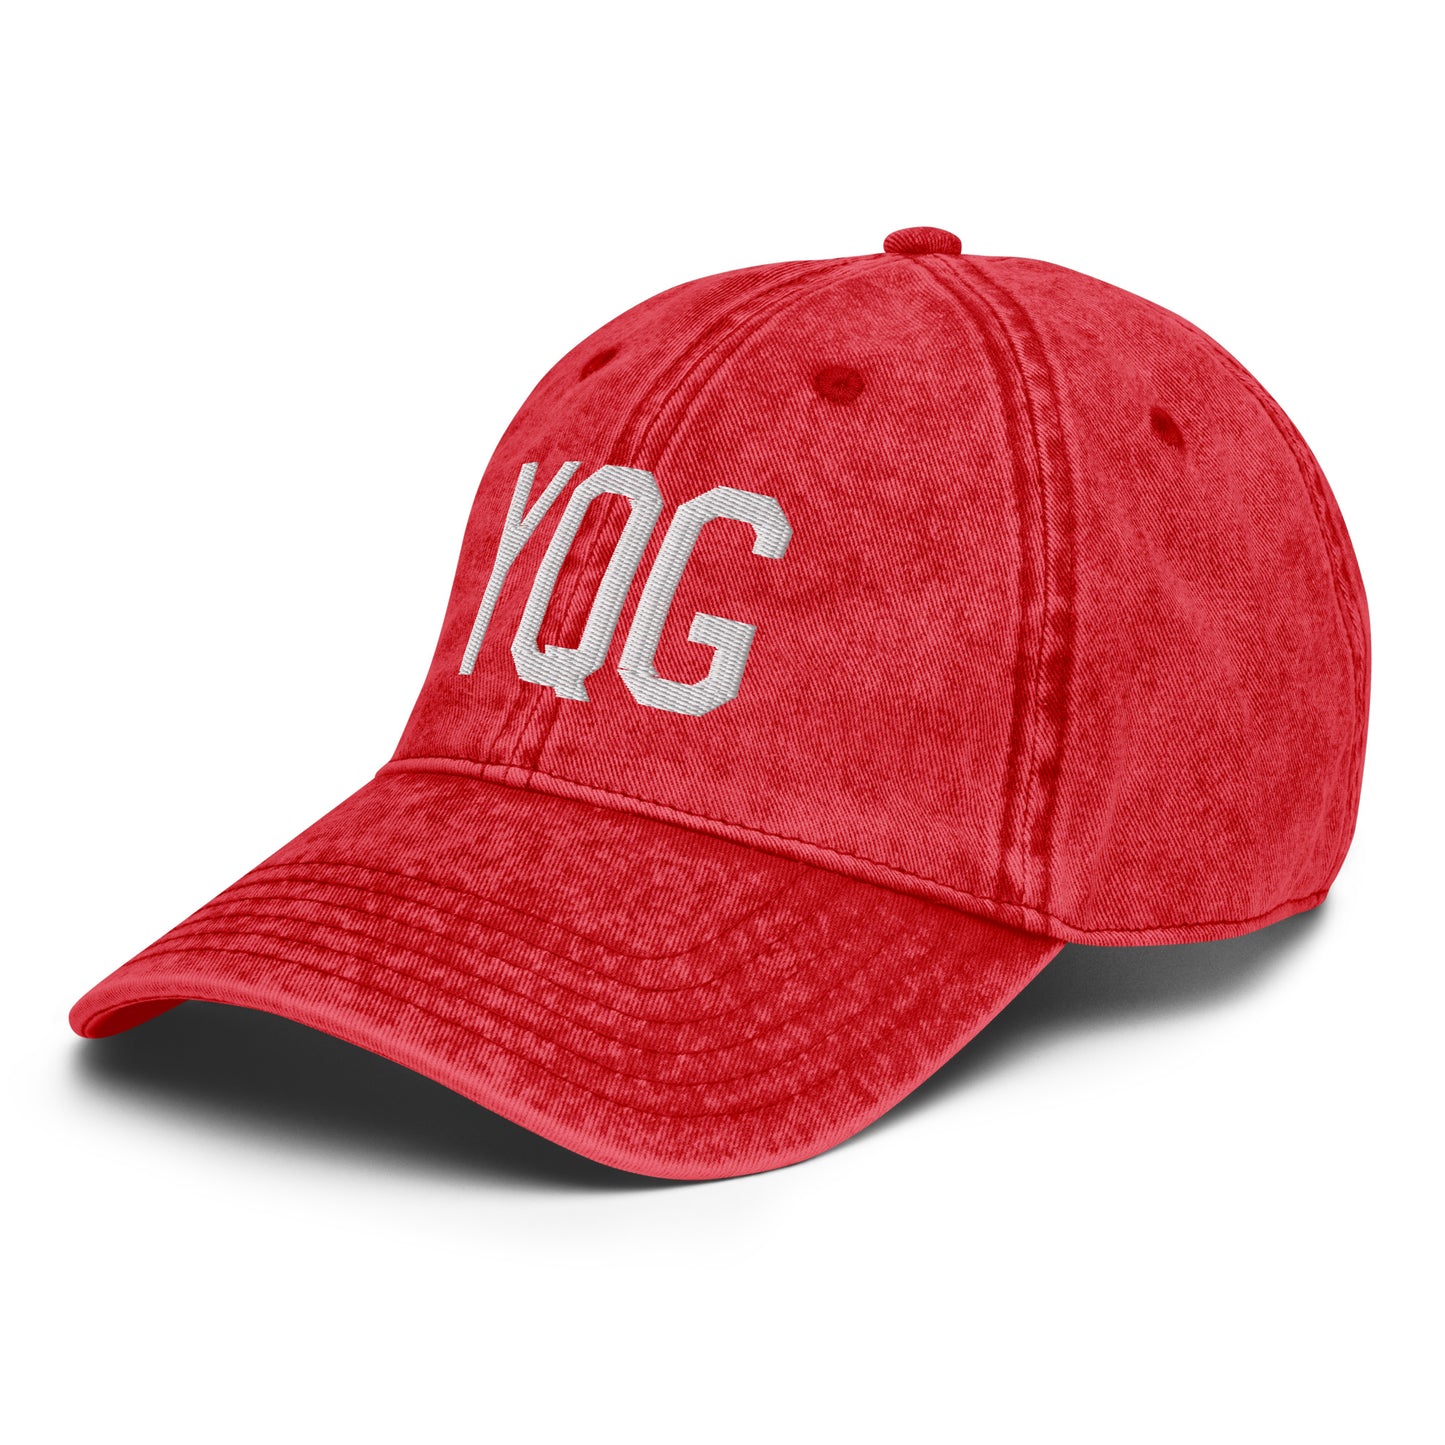 Airport Code Twill Cap - White • YQG Windsor • YHM Designs - Image 23